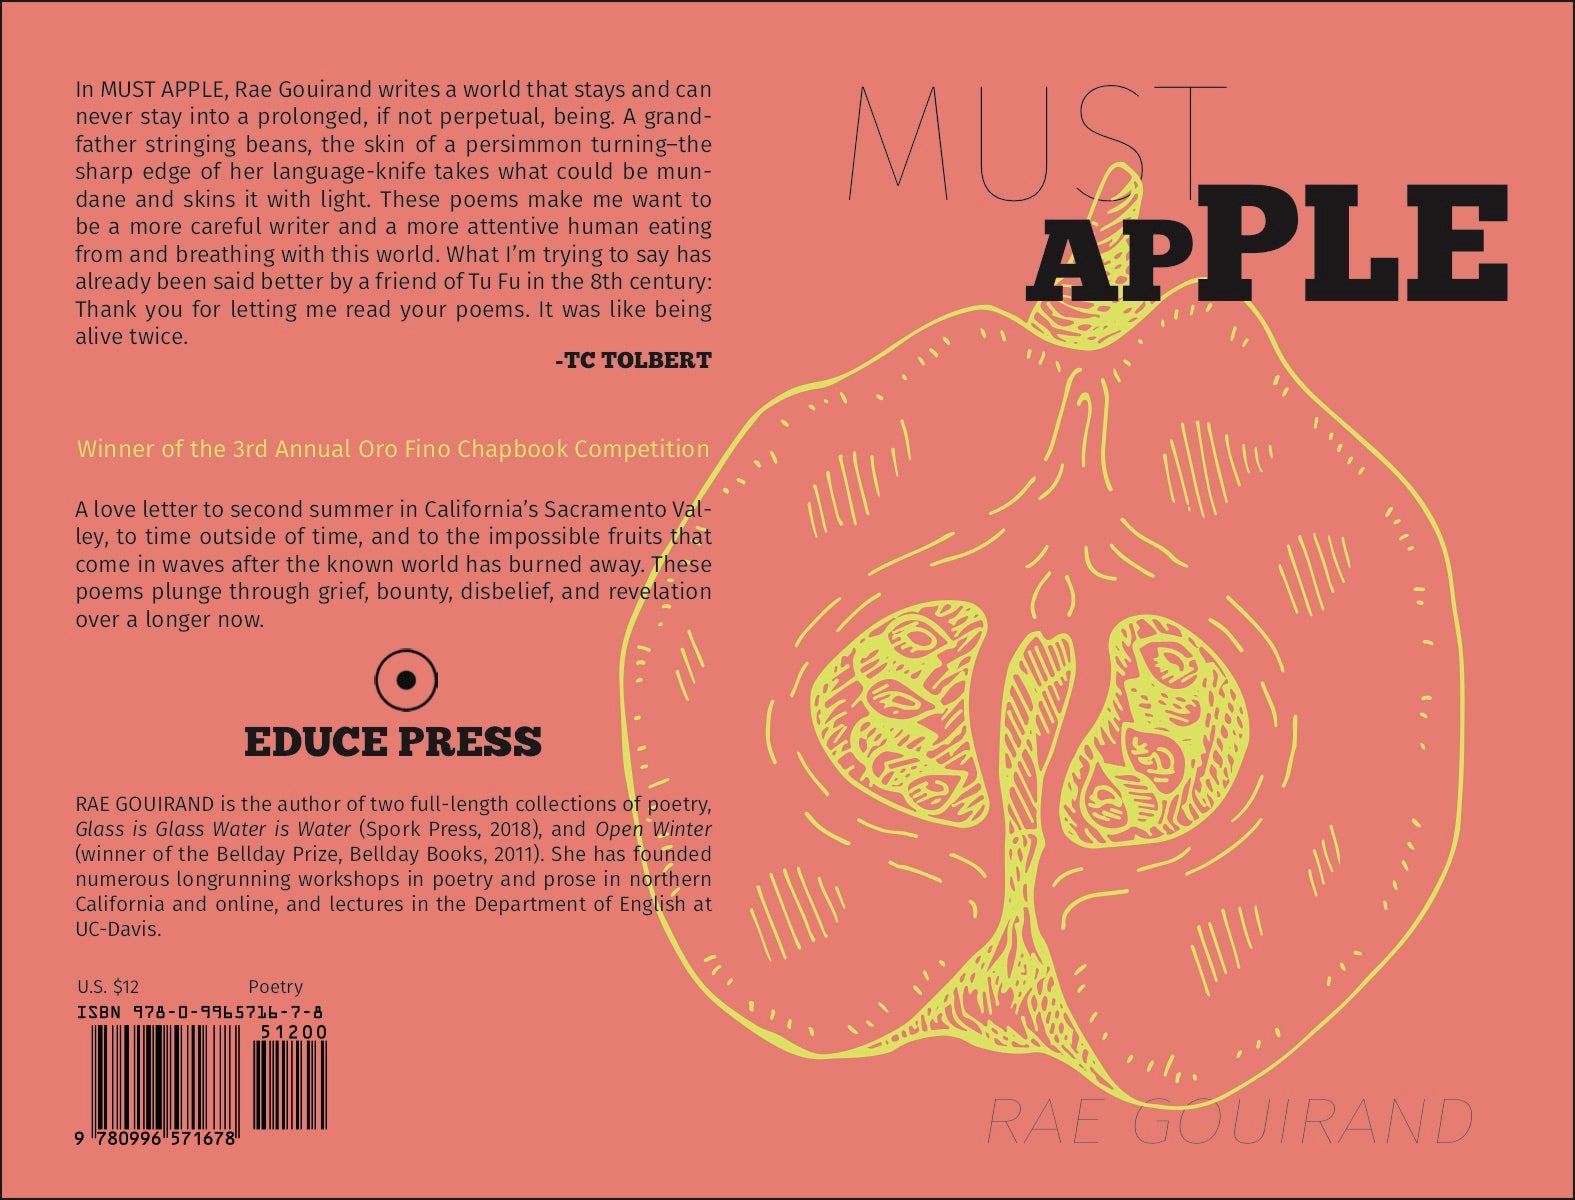 The cover of  Rae Gouirand's poetry collection "Must Apple."